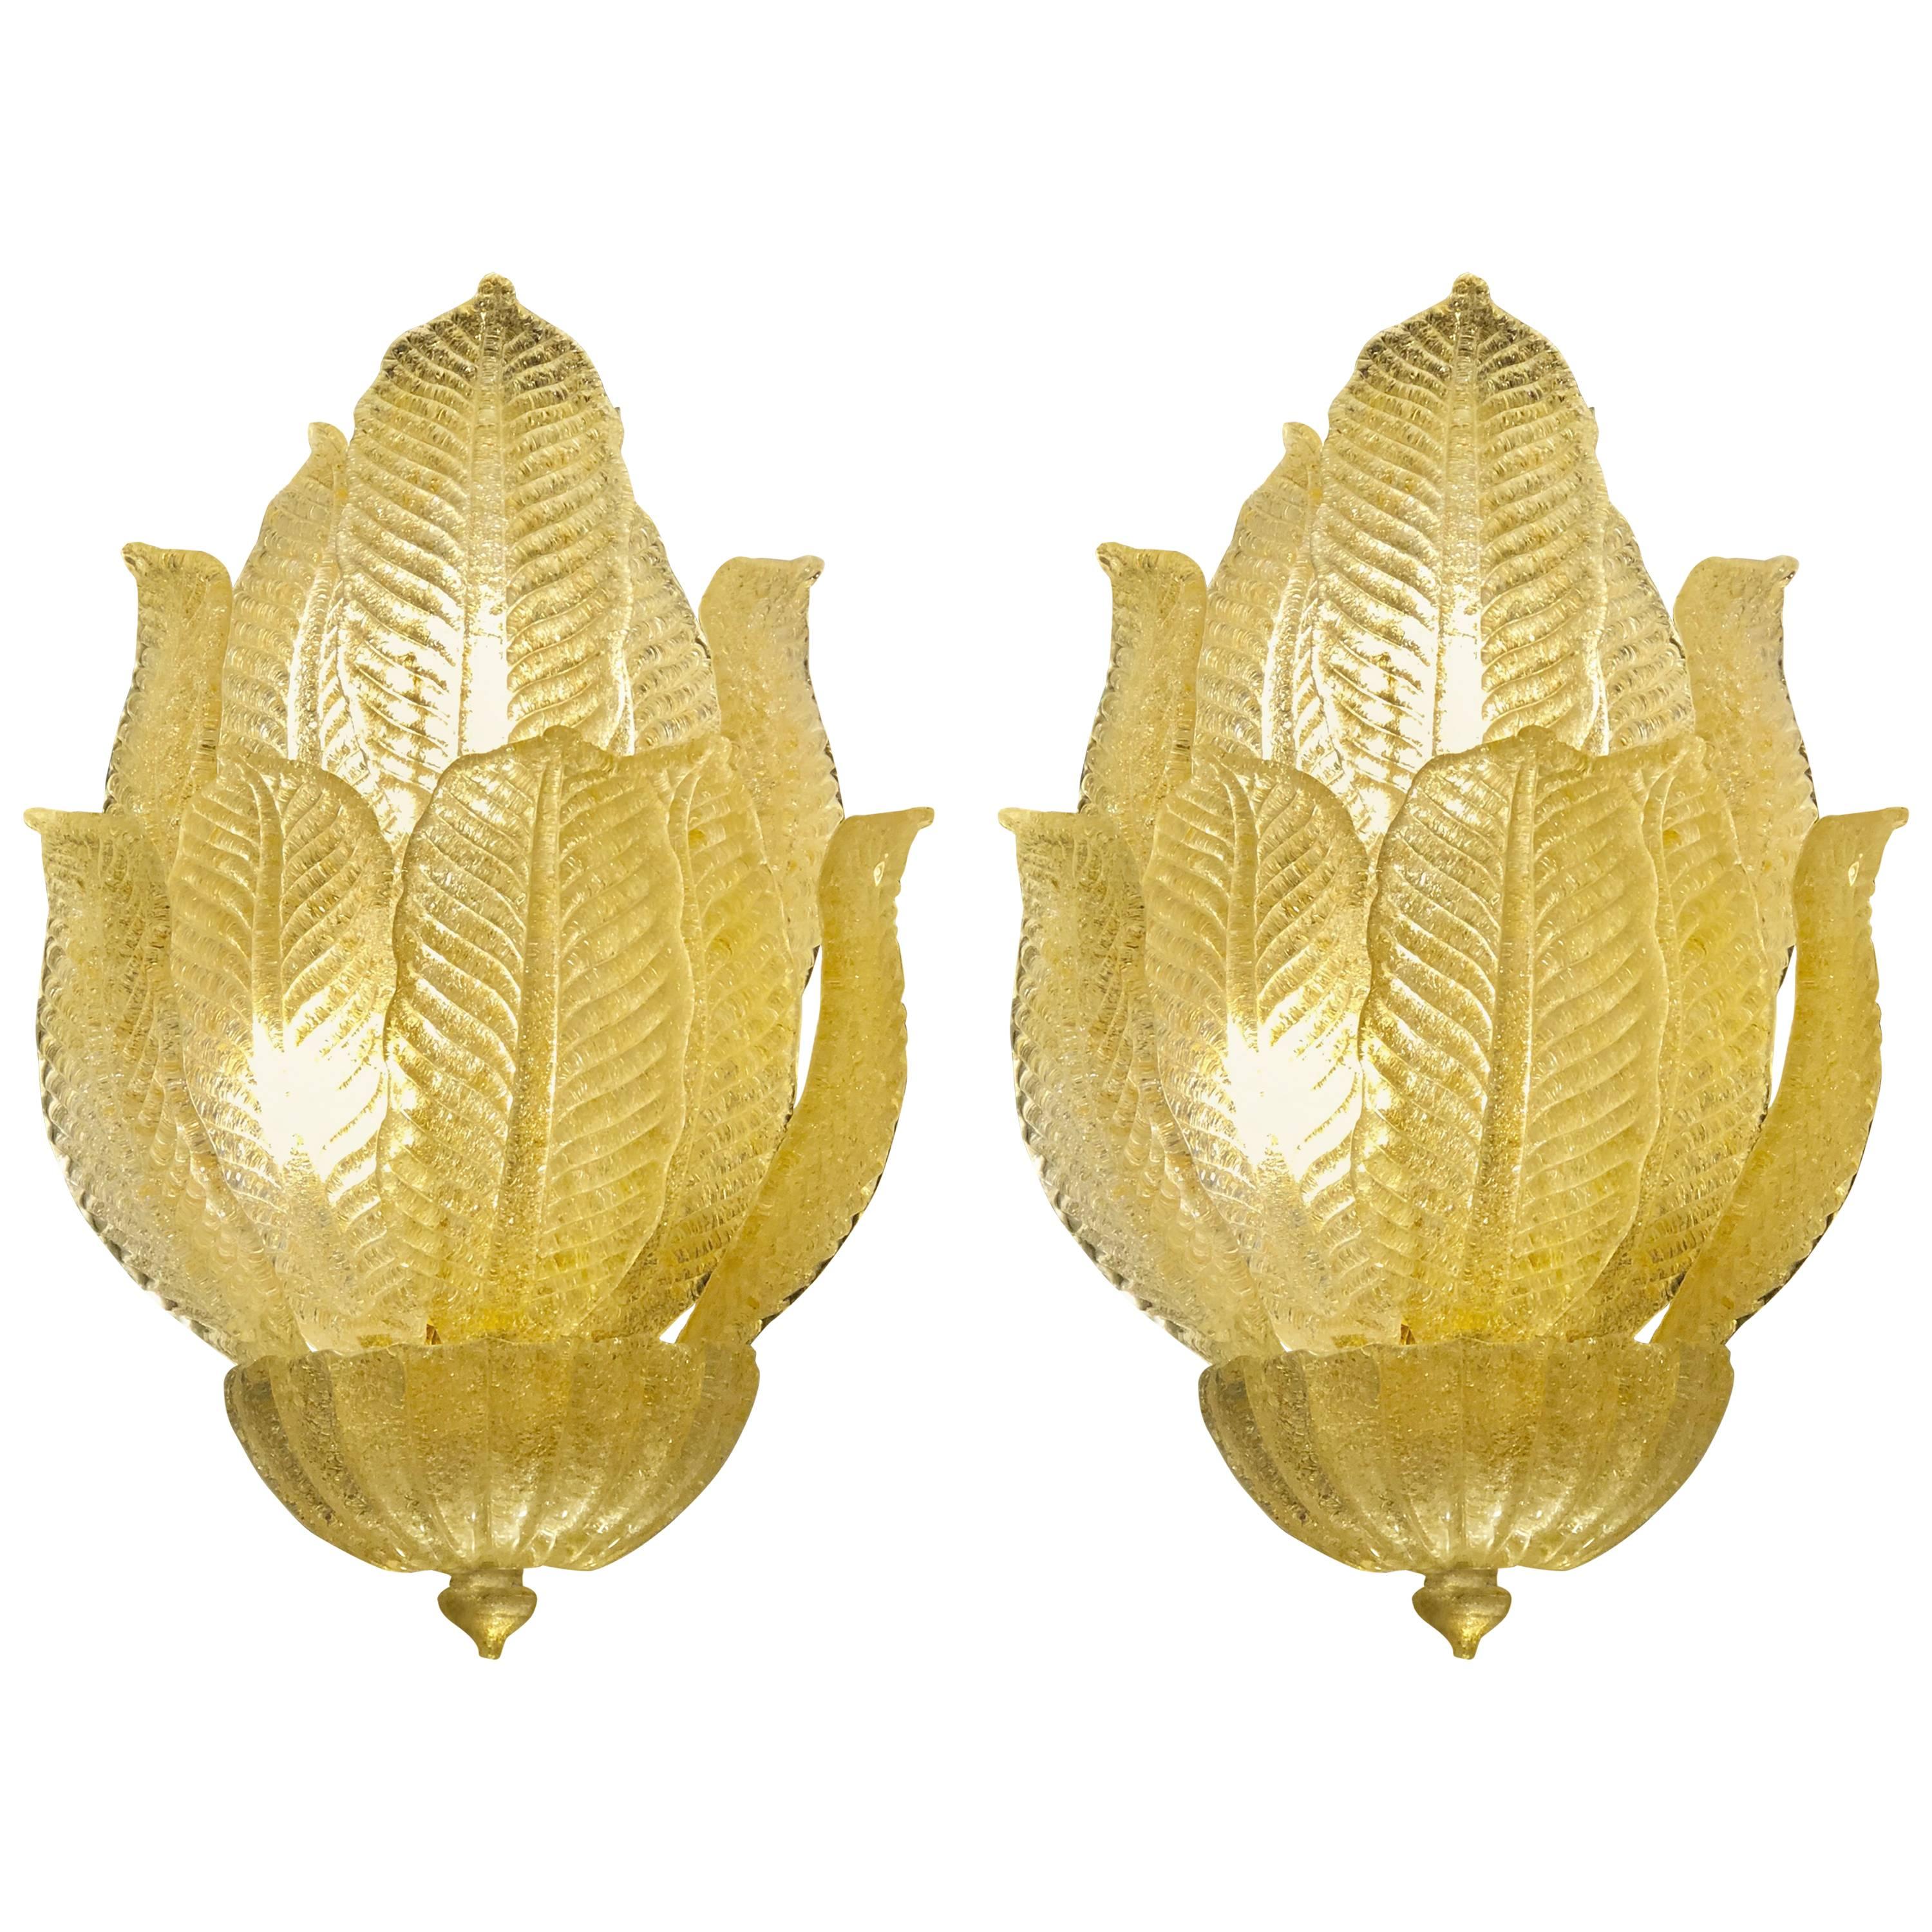 Pair of Barovier & Toso Murano Glass Leaf Design Four Light Wall Sconces